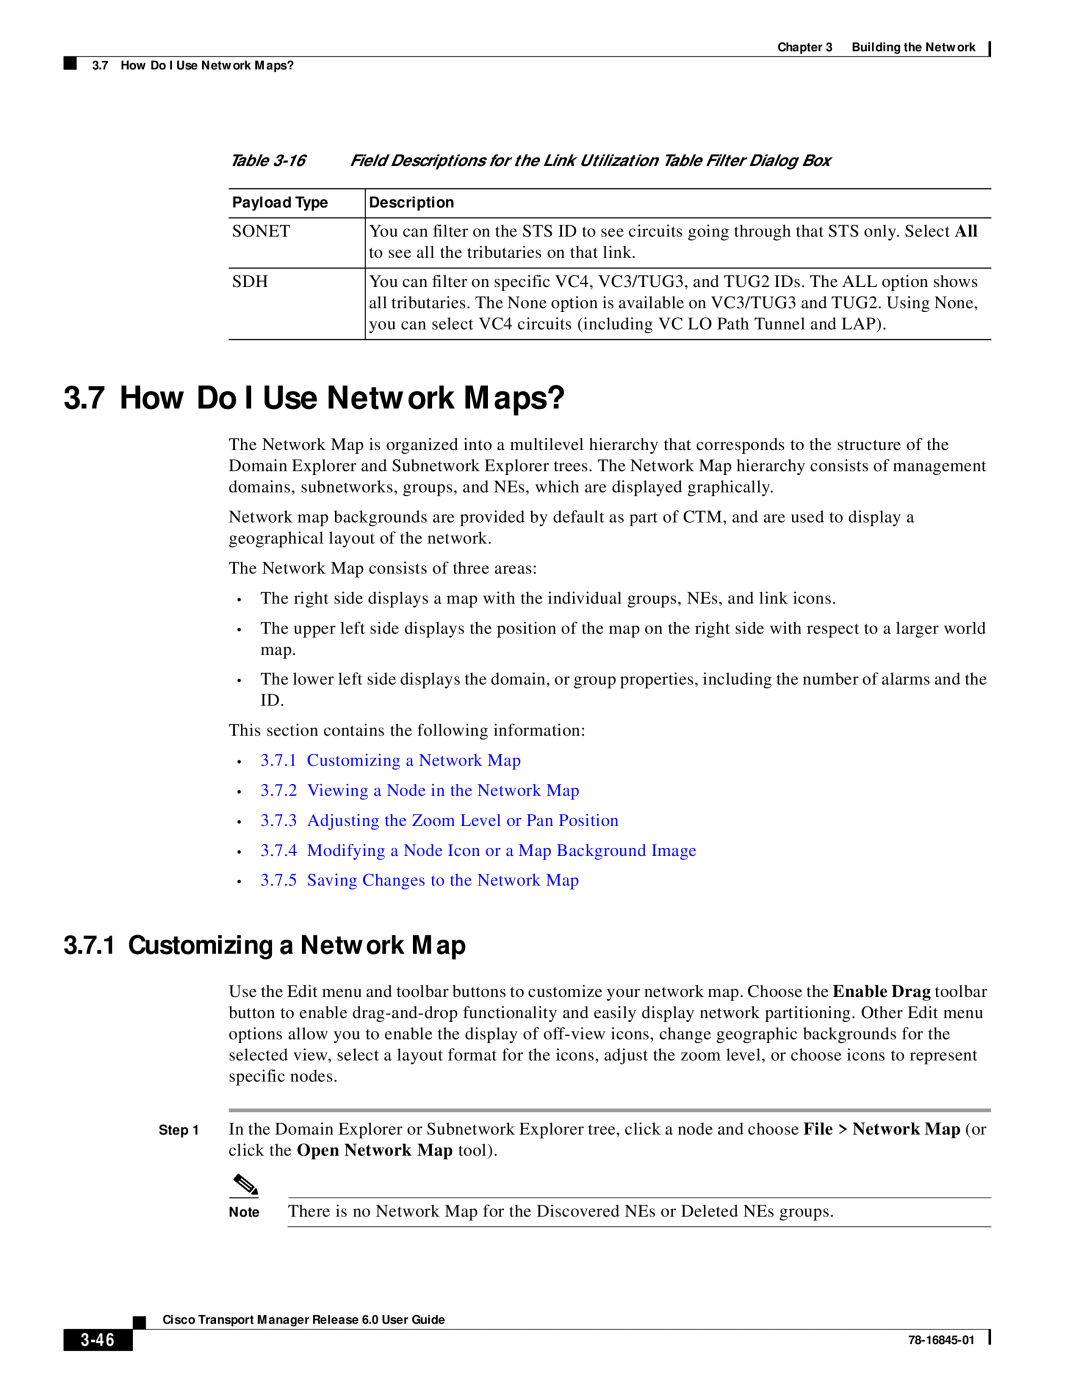 Cisco Systems 78-16845-01 How Do I Use Network Maps?, Customizing a Network Map, Viewing a Node in the Network Map, 3-46 